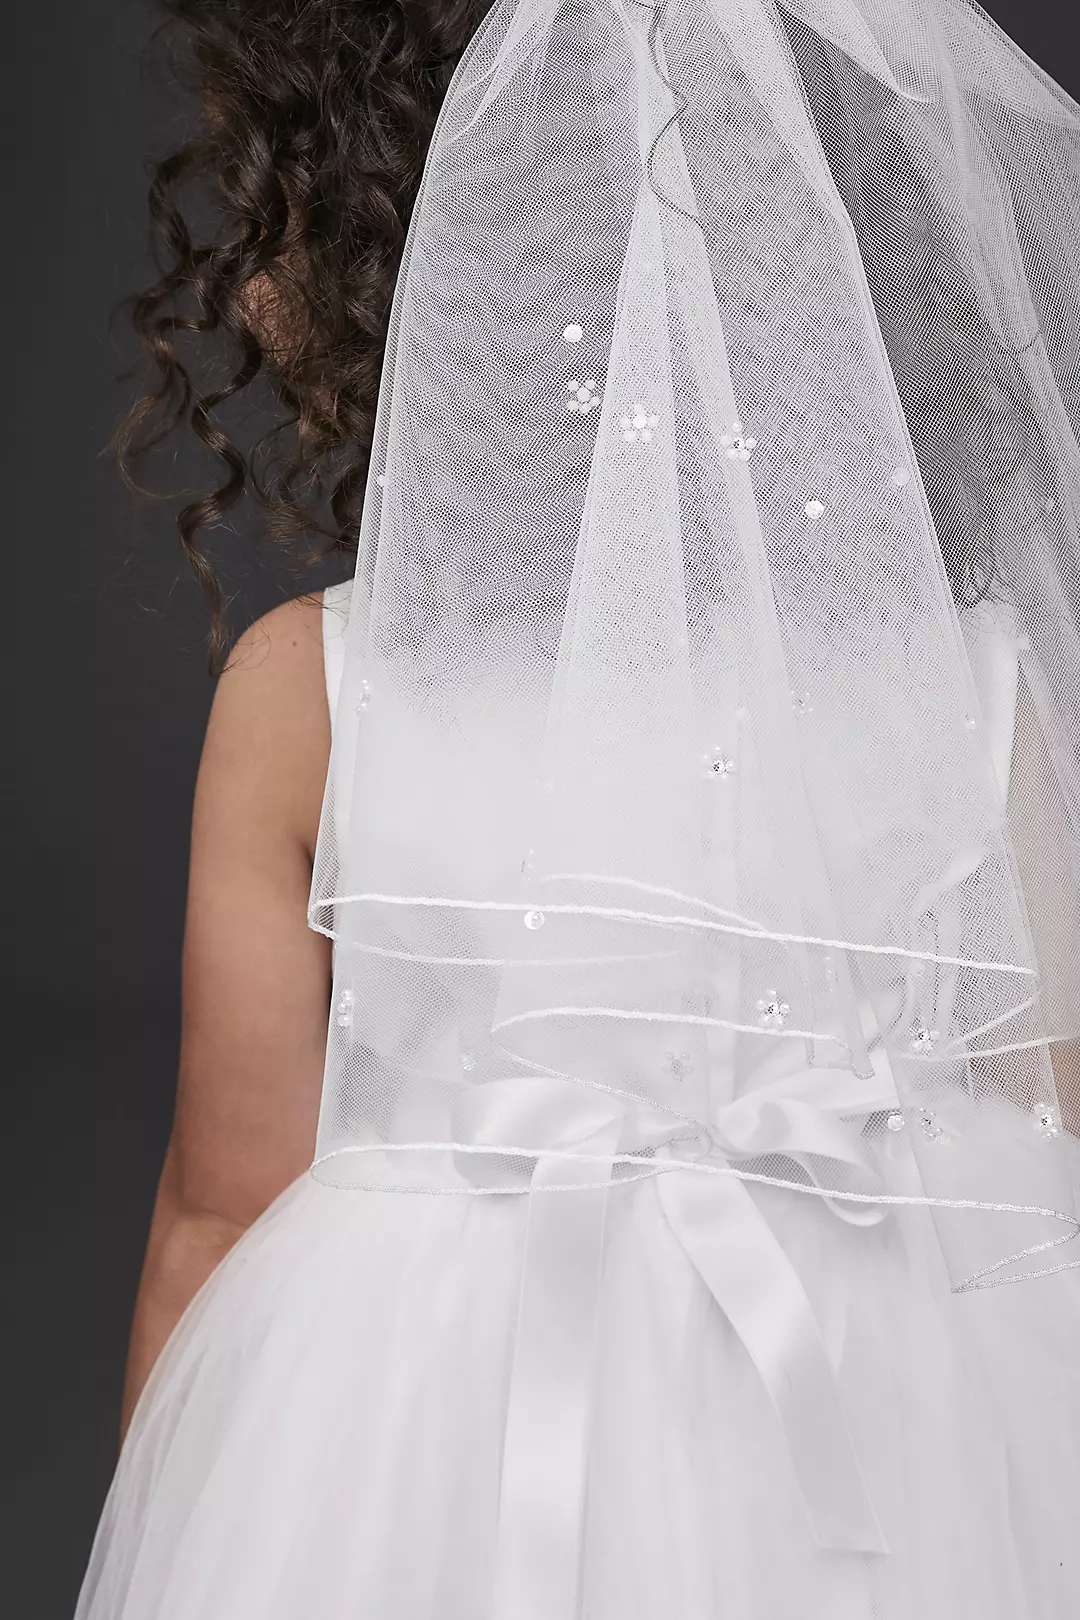 Pencil-Edge Communion Veil with Pearl Flowers Image 2